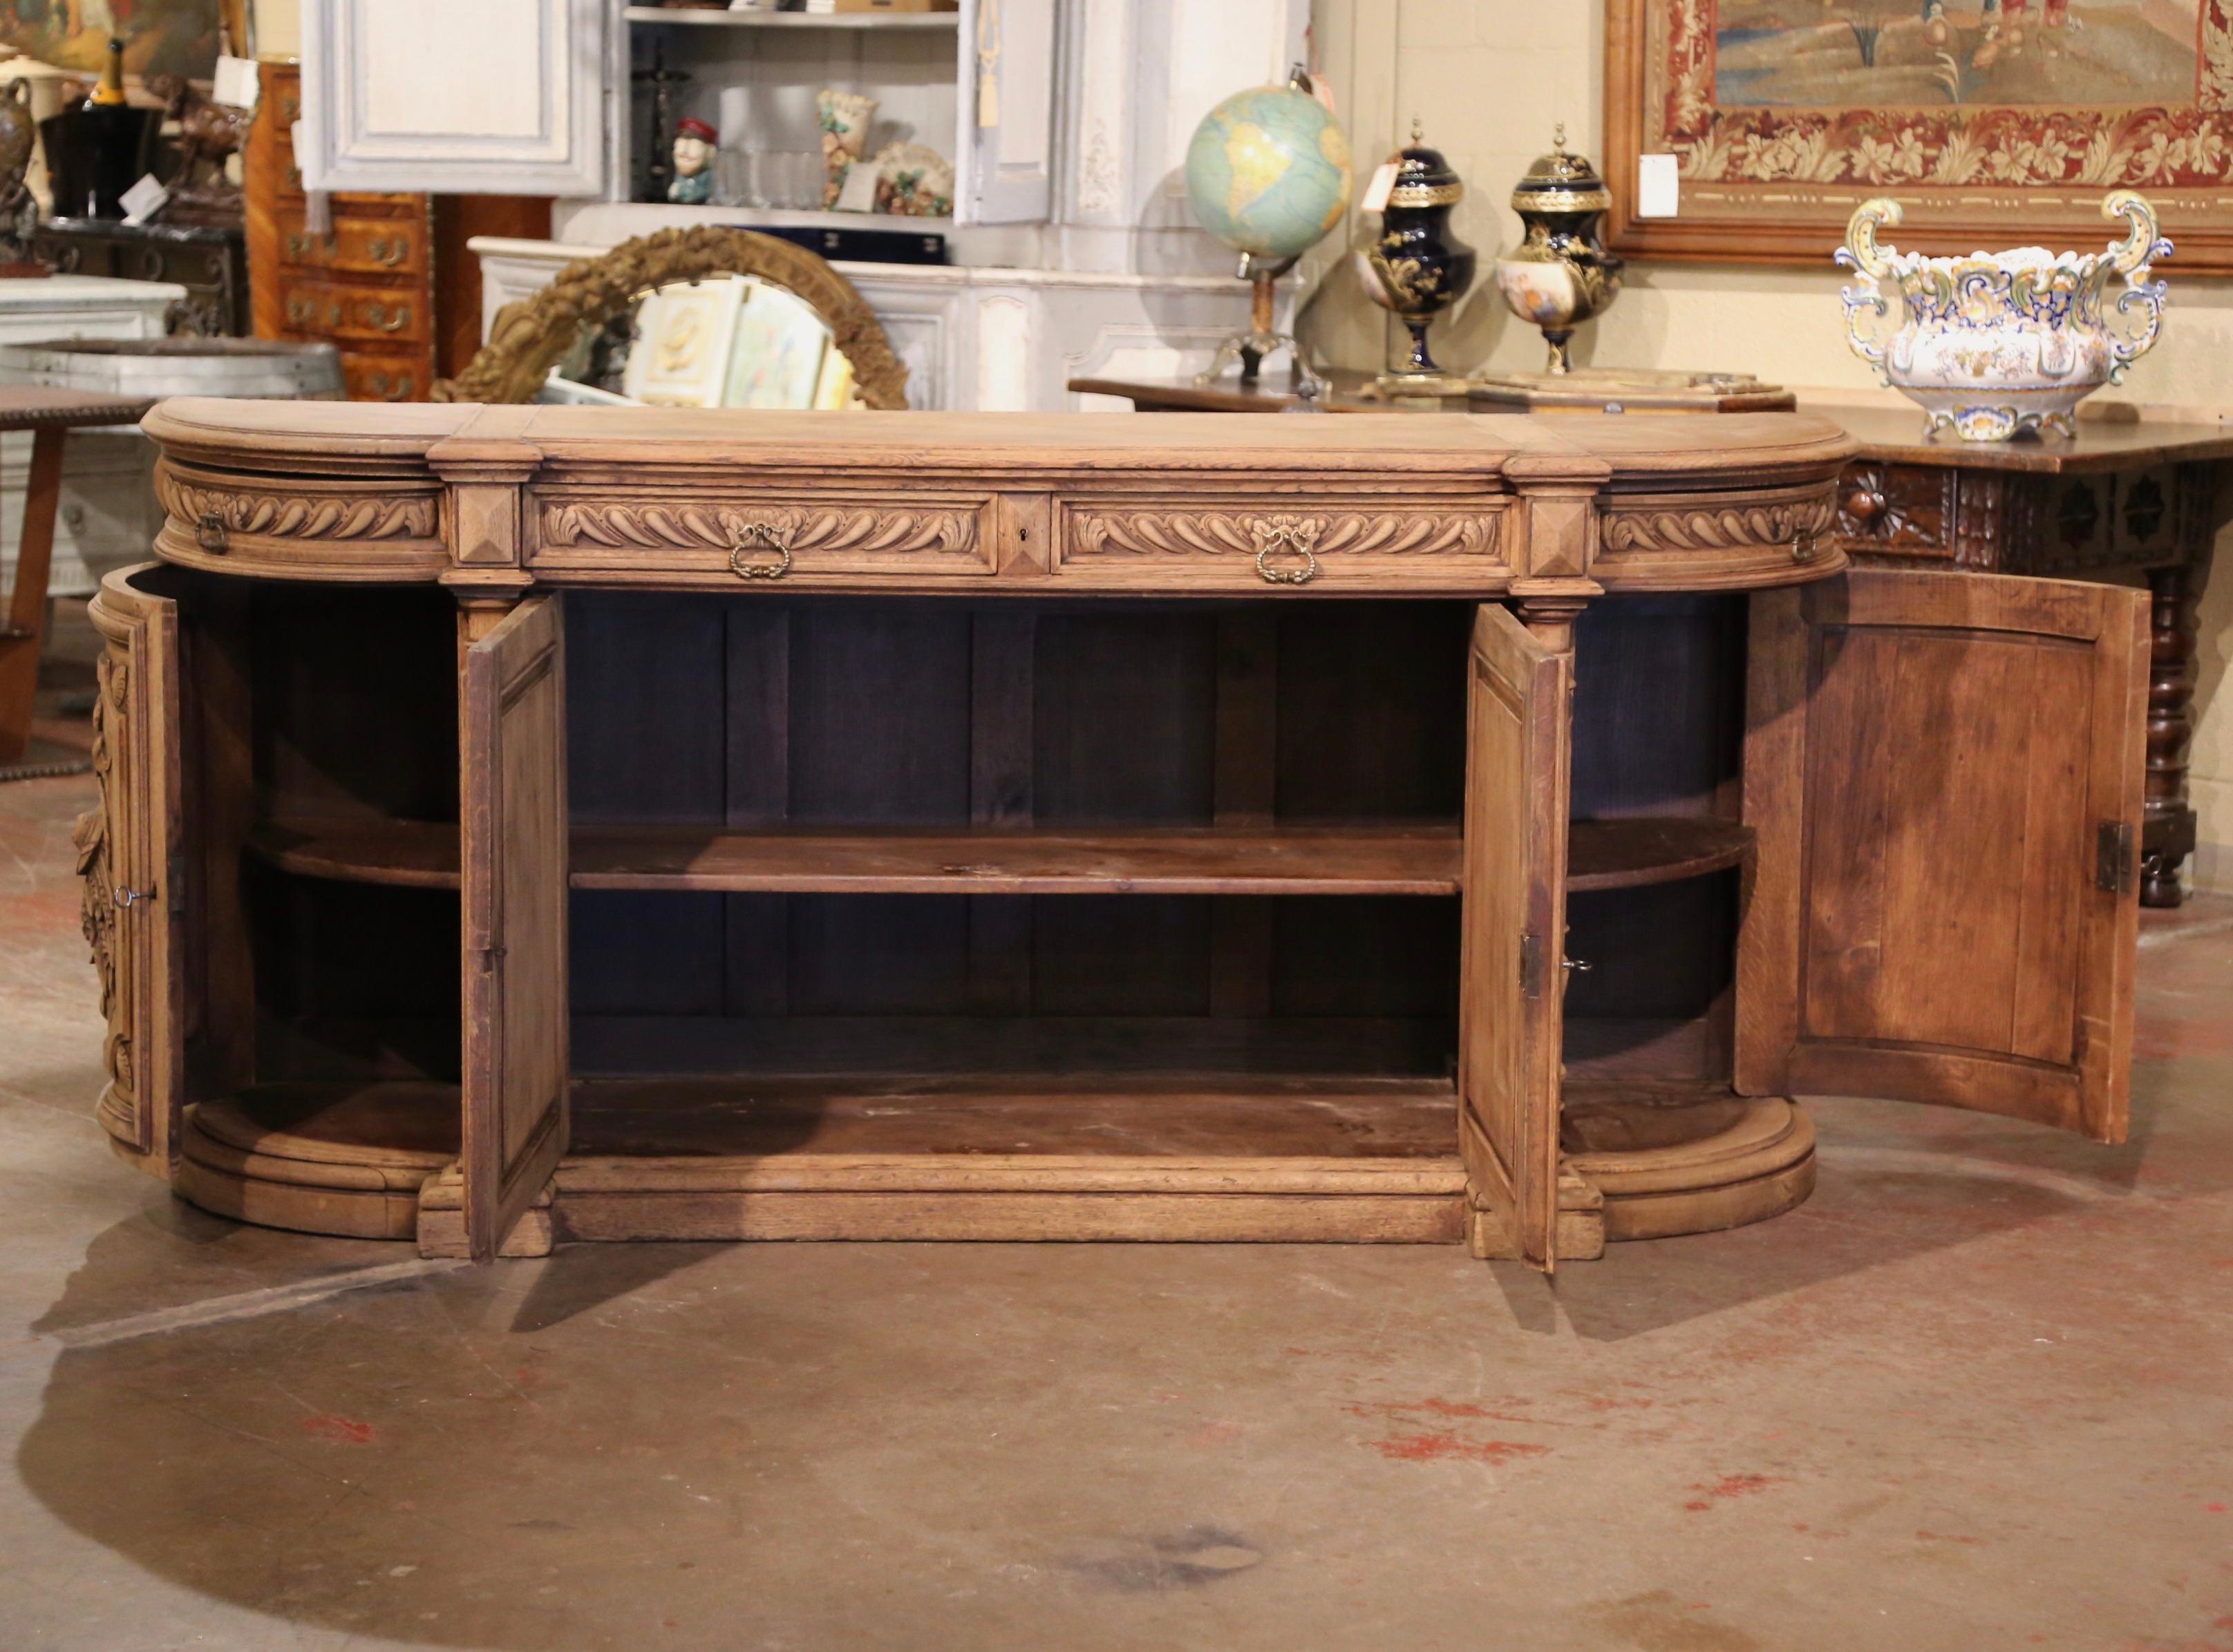 19th Century French Black Forest Carved Bleached Oak Four-Door Buffet Enfilade 5